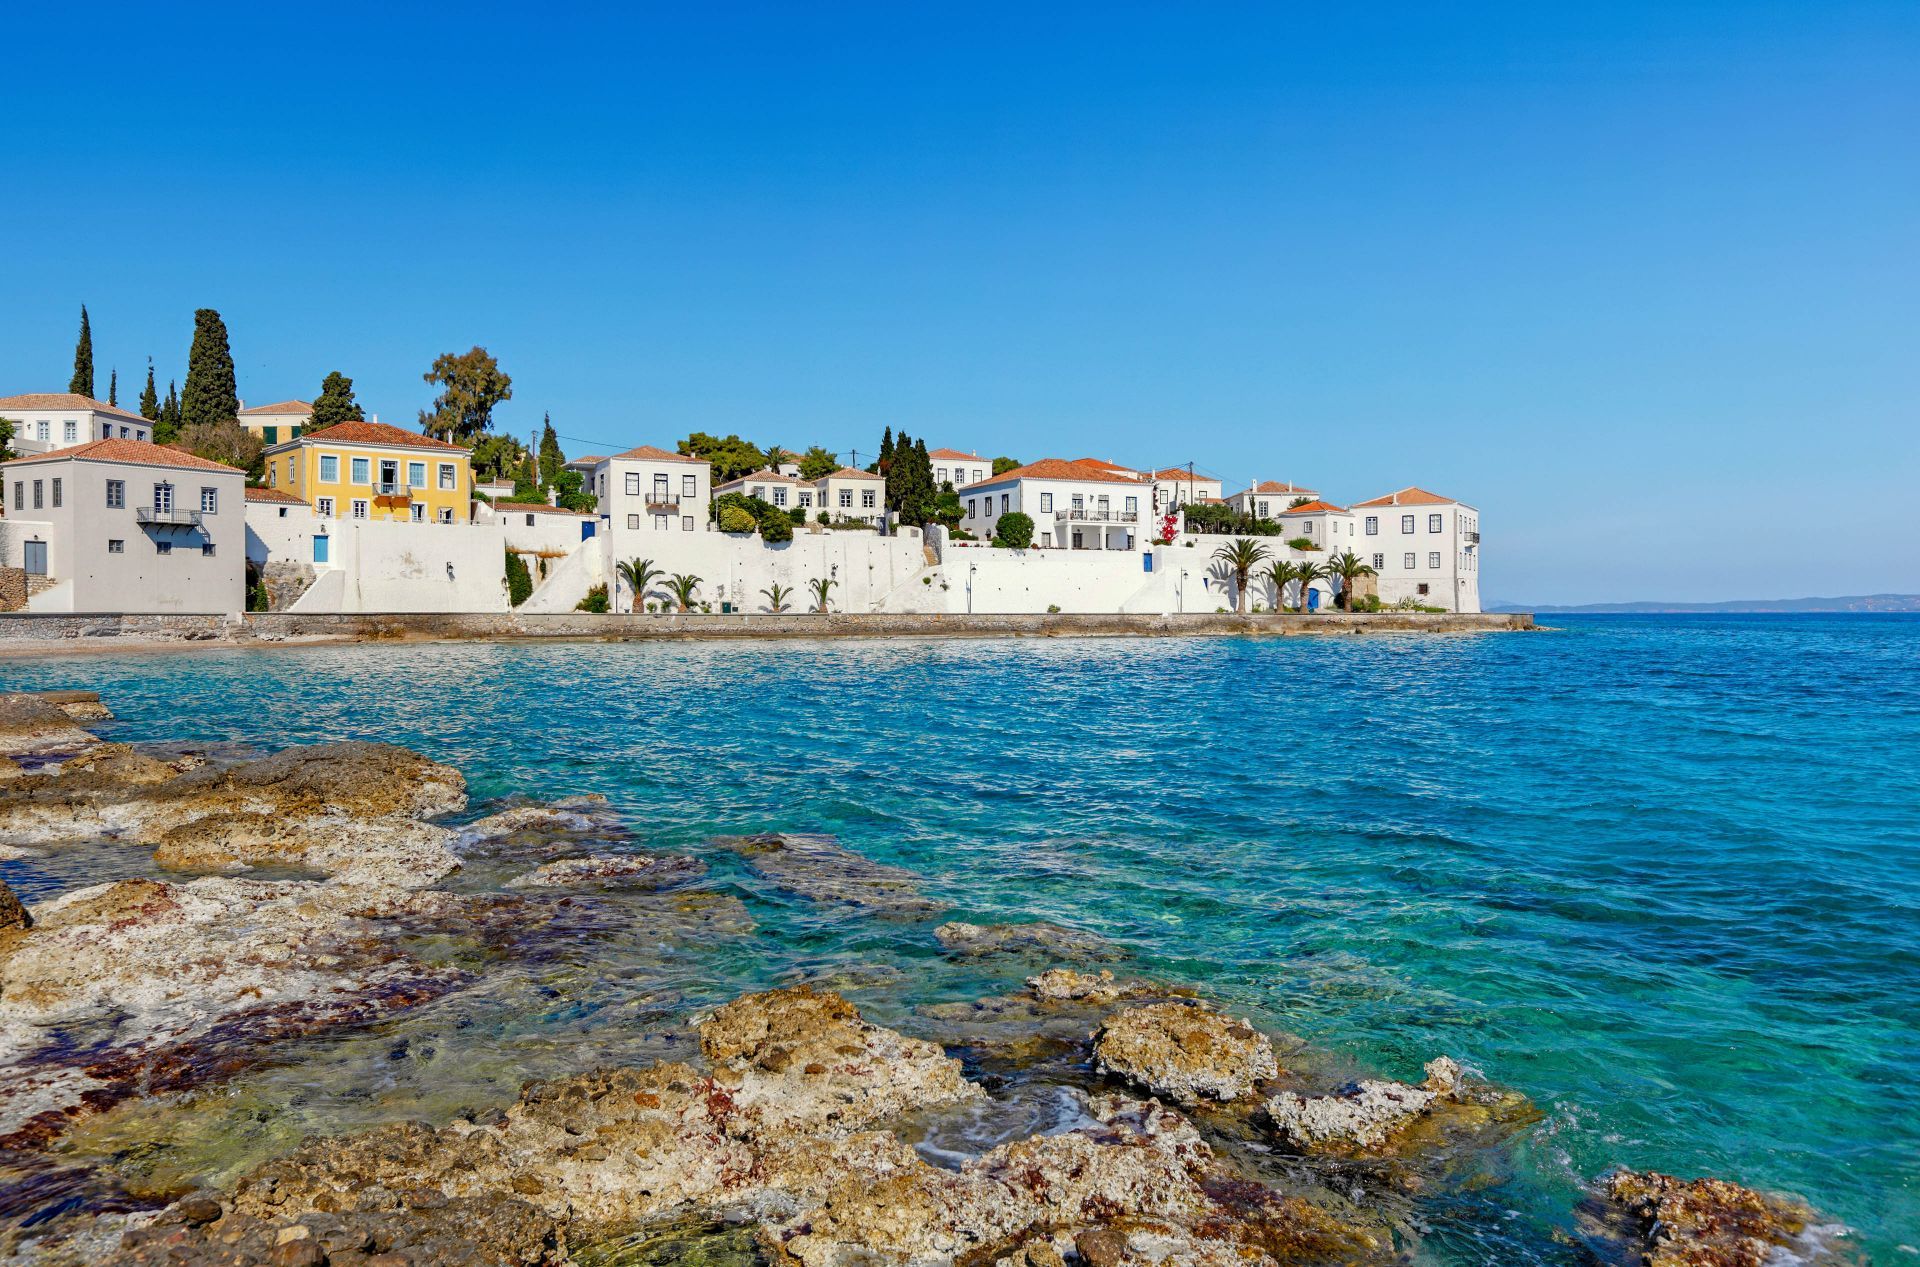 Spetses Greece: The elegant Town and its many mansions